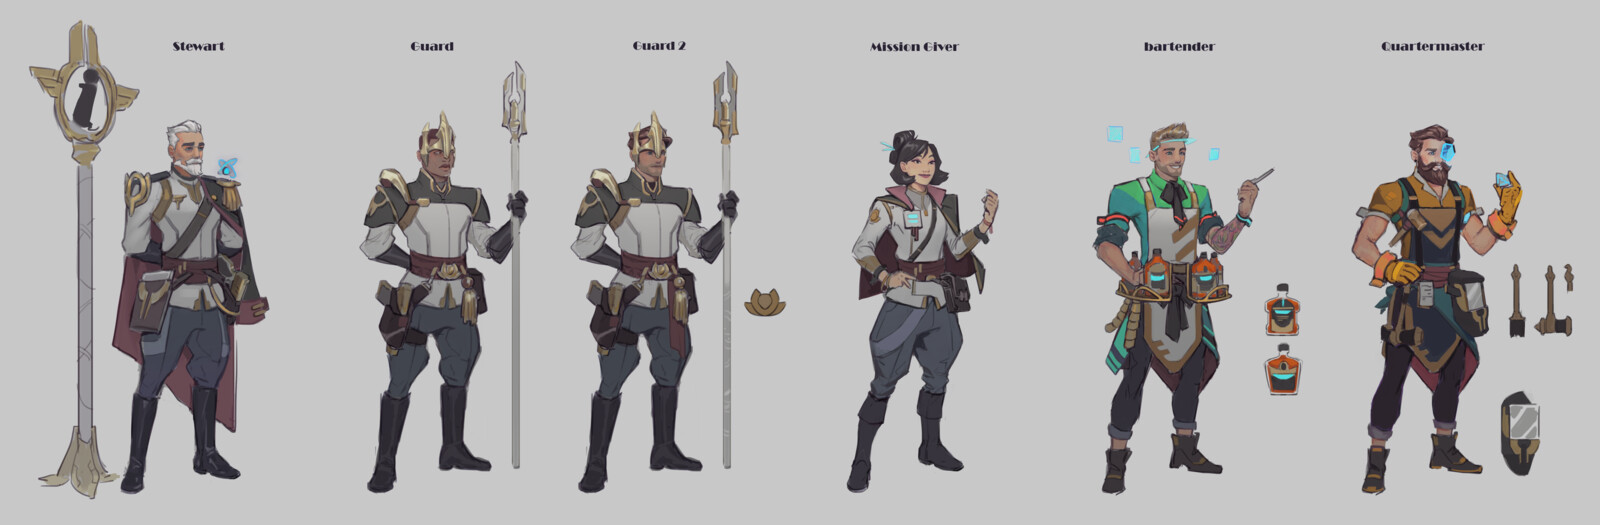 Outfits design for the staff working on the HUB